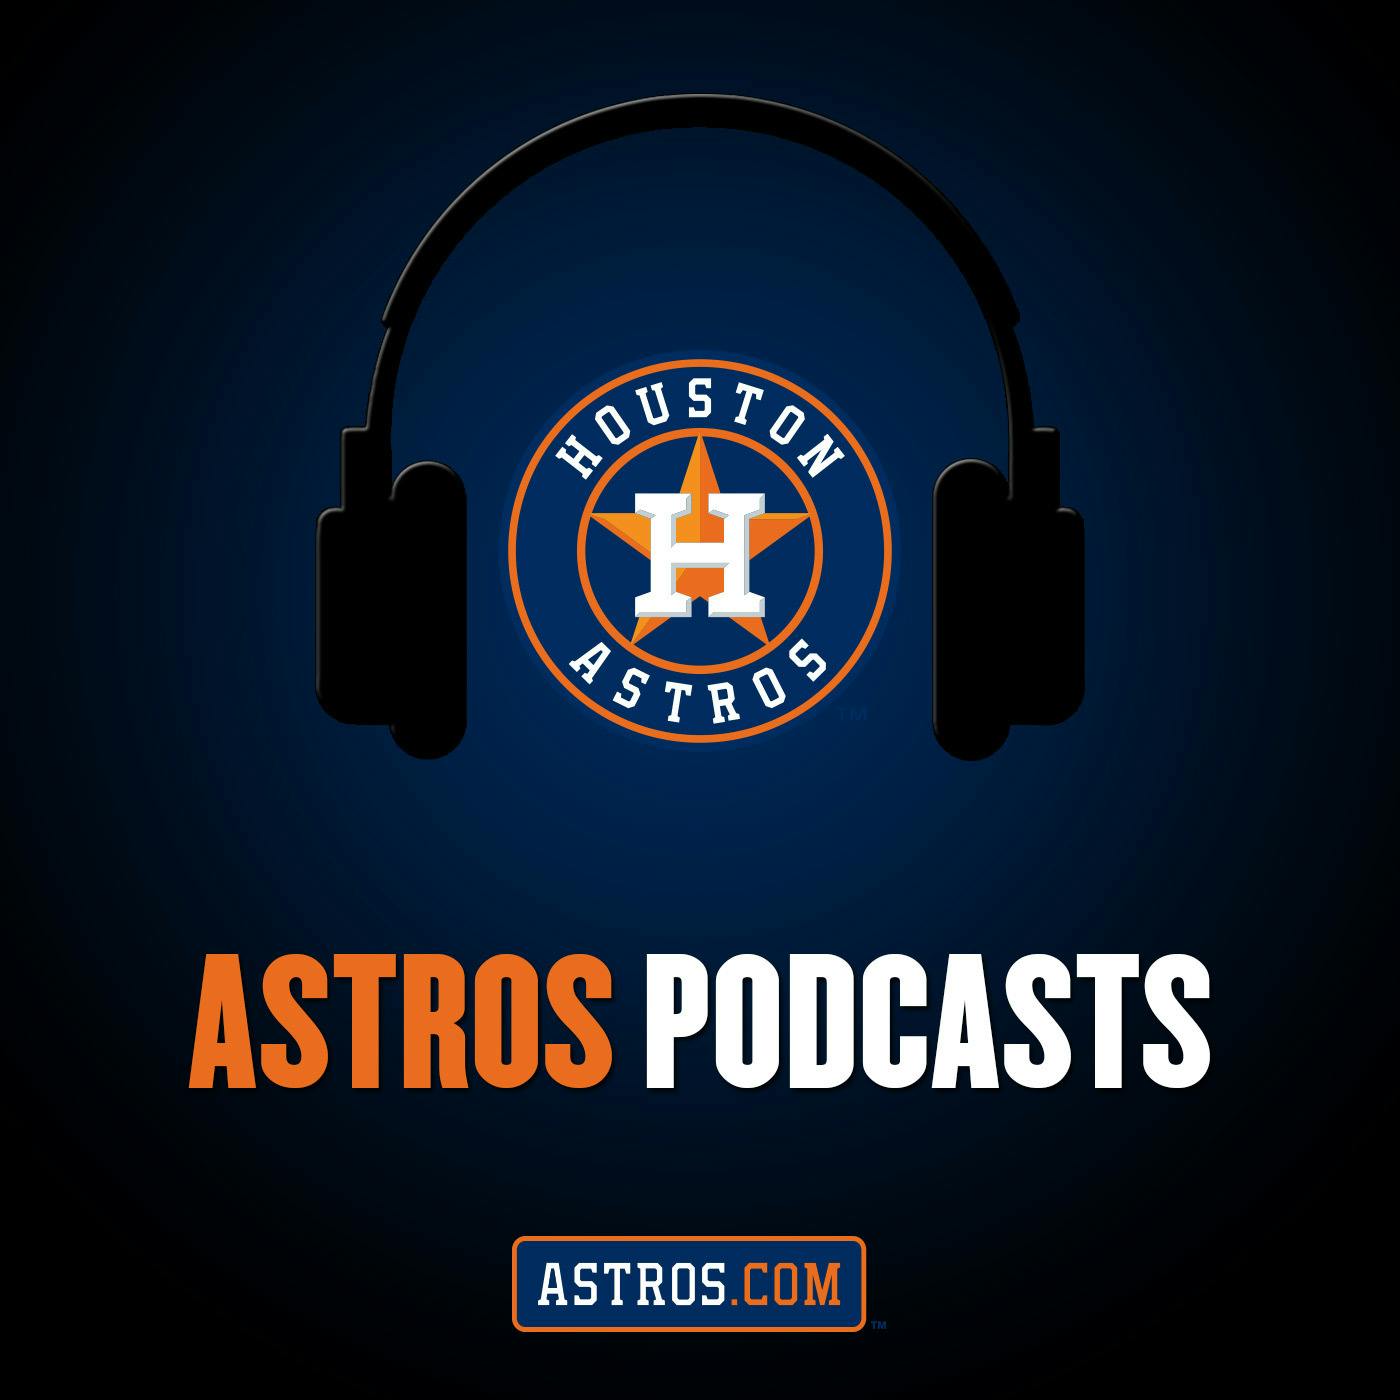 7/12/21 Astros Relaunch by Karbach Brewing: Jose Altuve’s Walk-Off against the Yankees